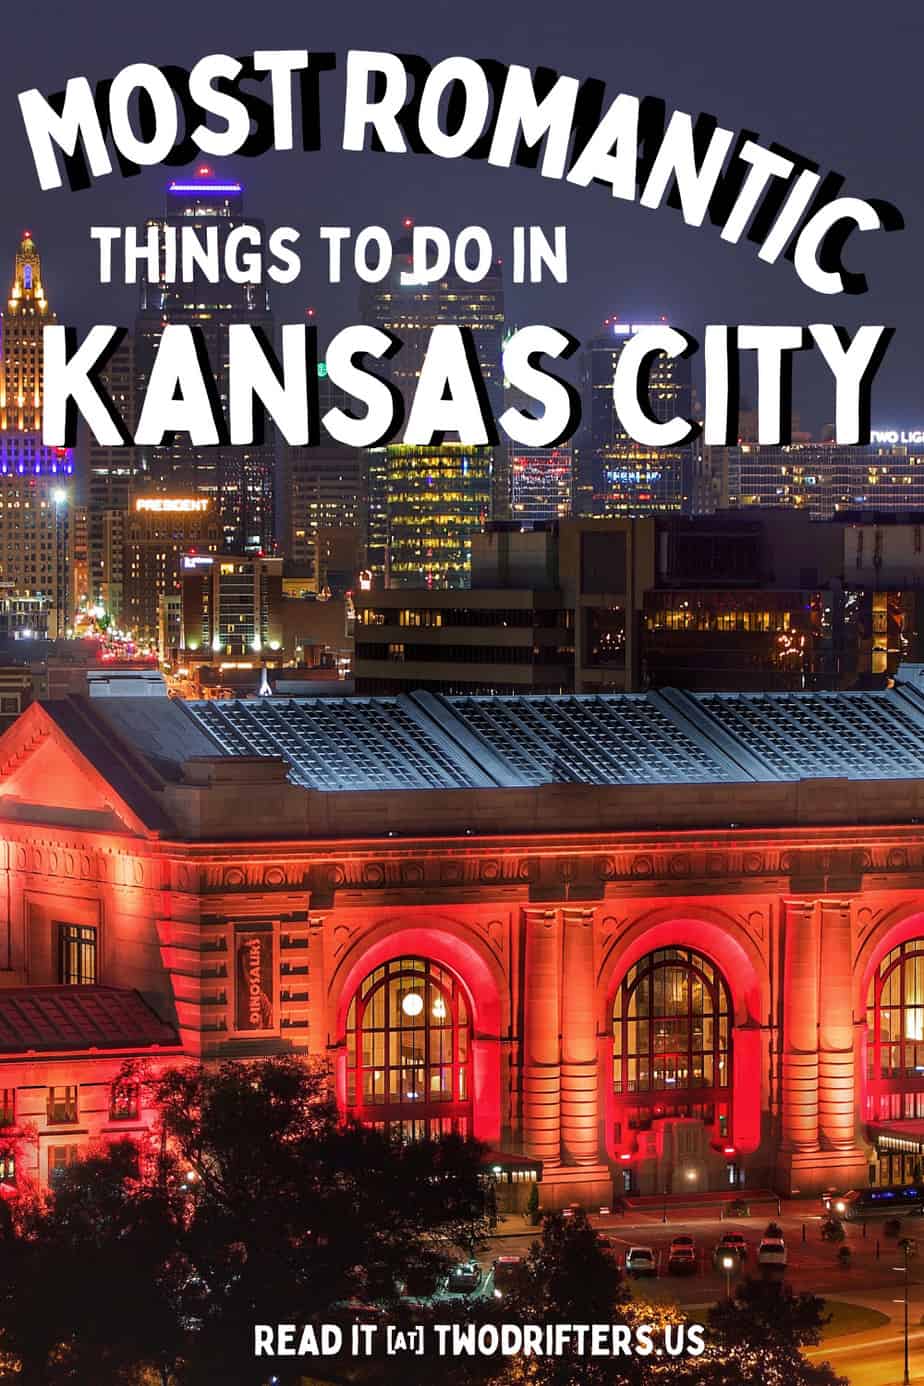 Pinterest social image that says “Most romantic things to do in Kansas City.”